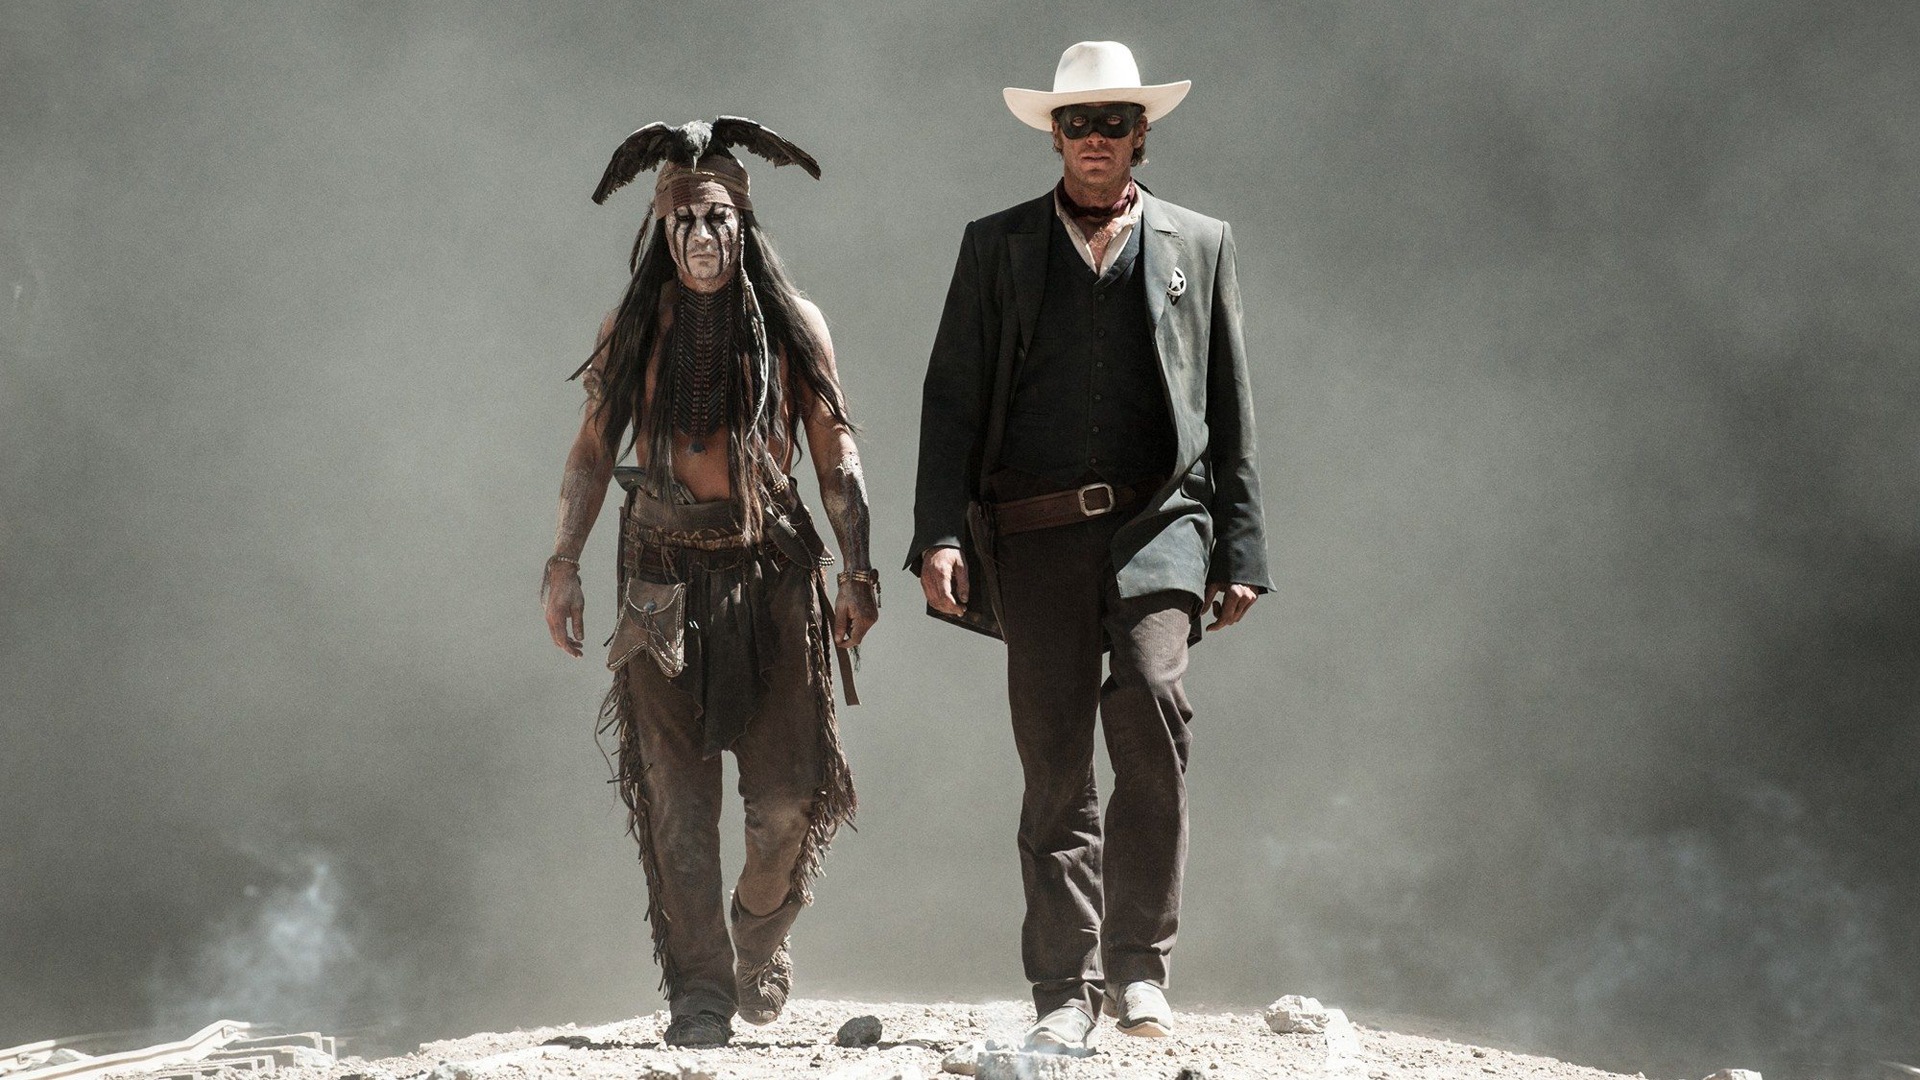 The Lone Ranger HD movie wallpapers #4 - 1920x1080